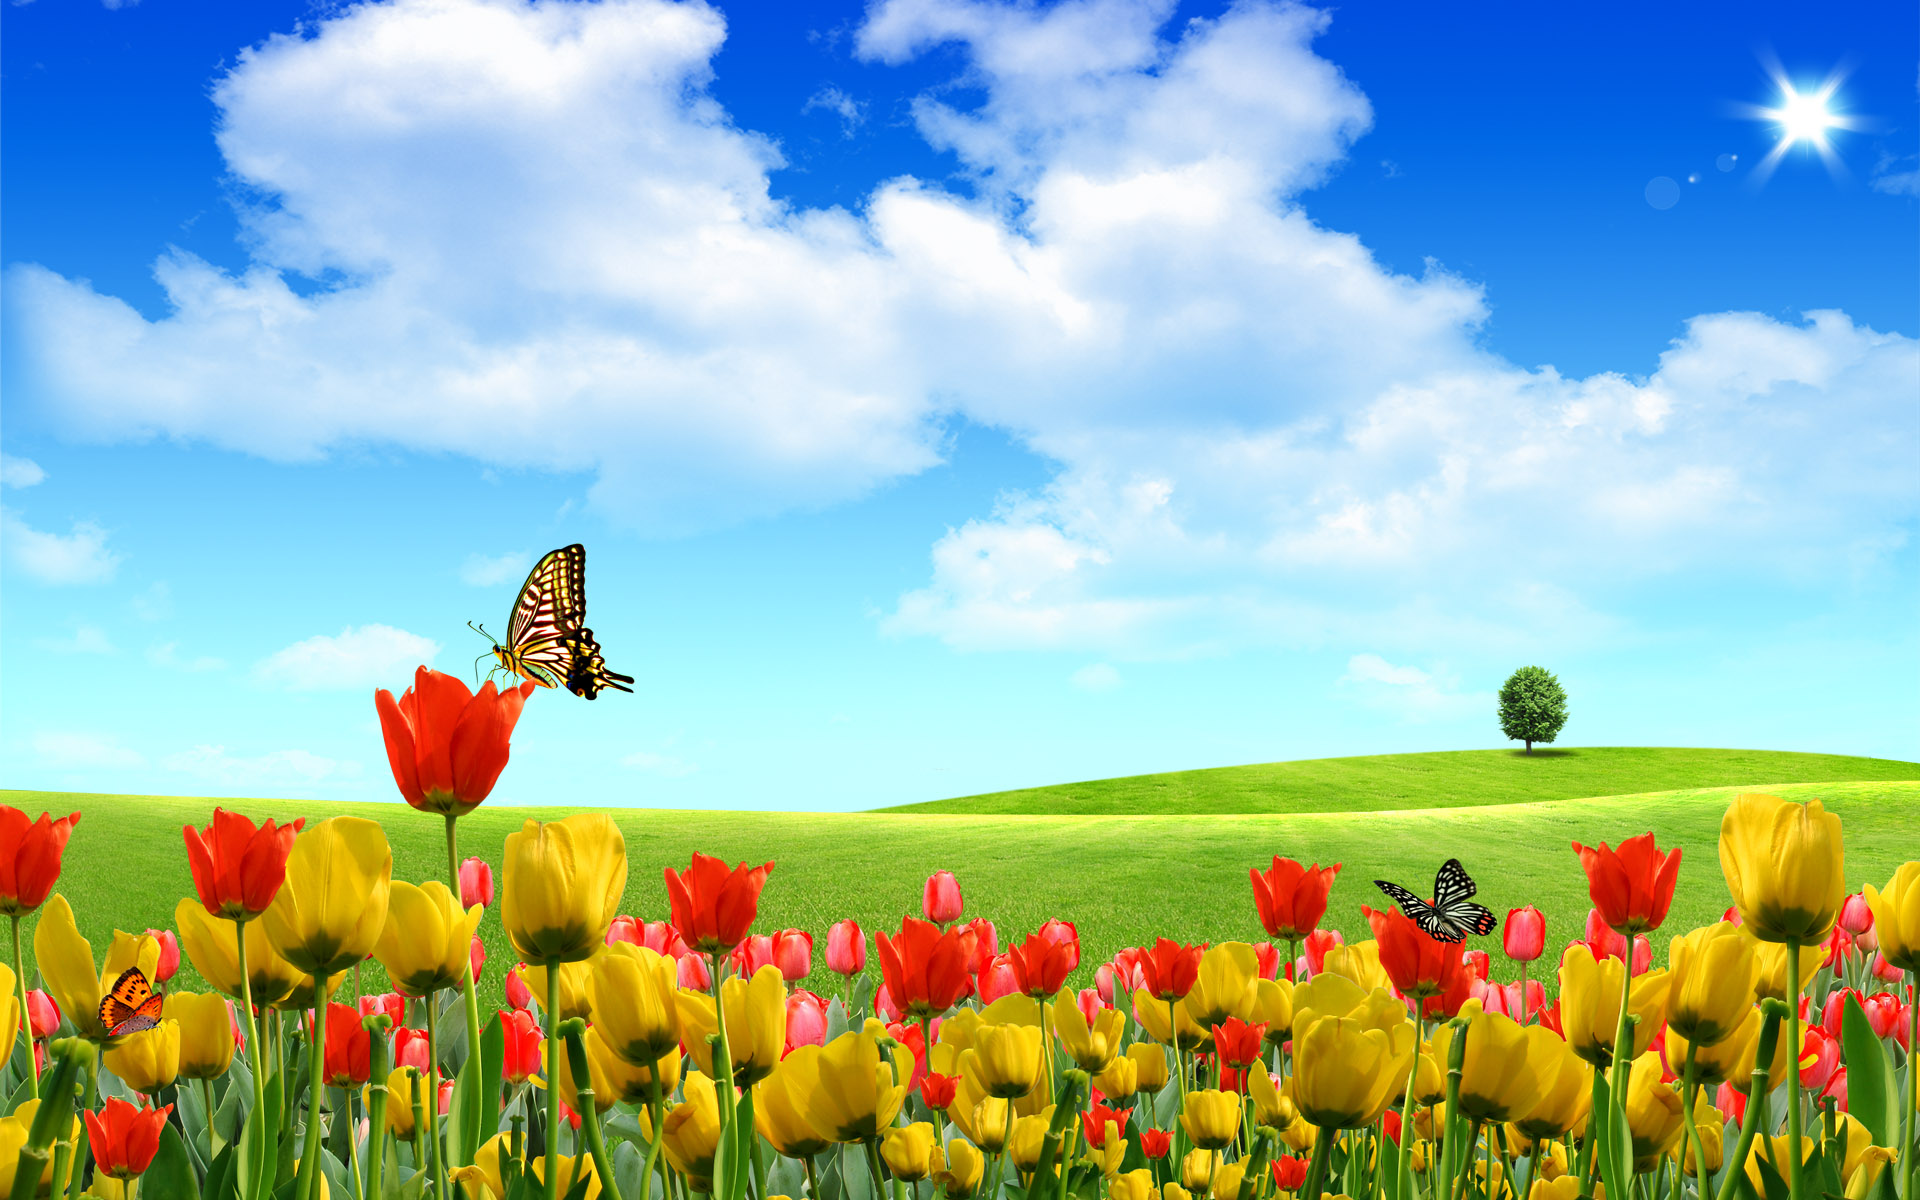 Scenery Wallpaper Includes Beautiful Buds Boasting Of Its